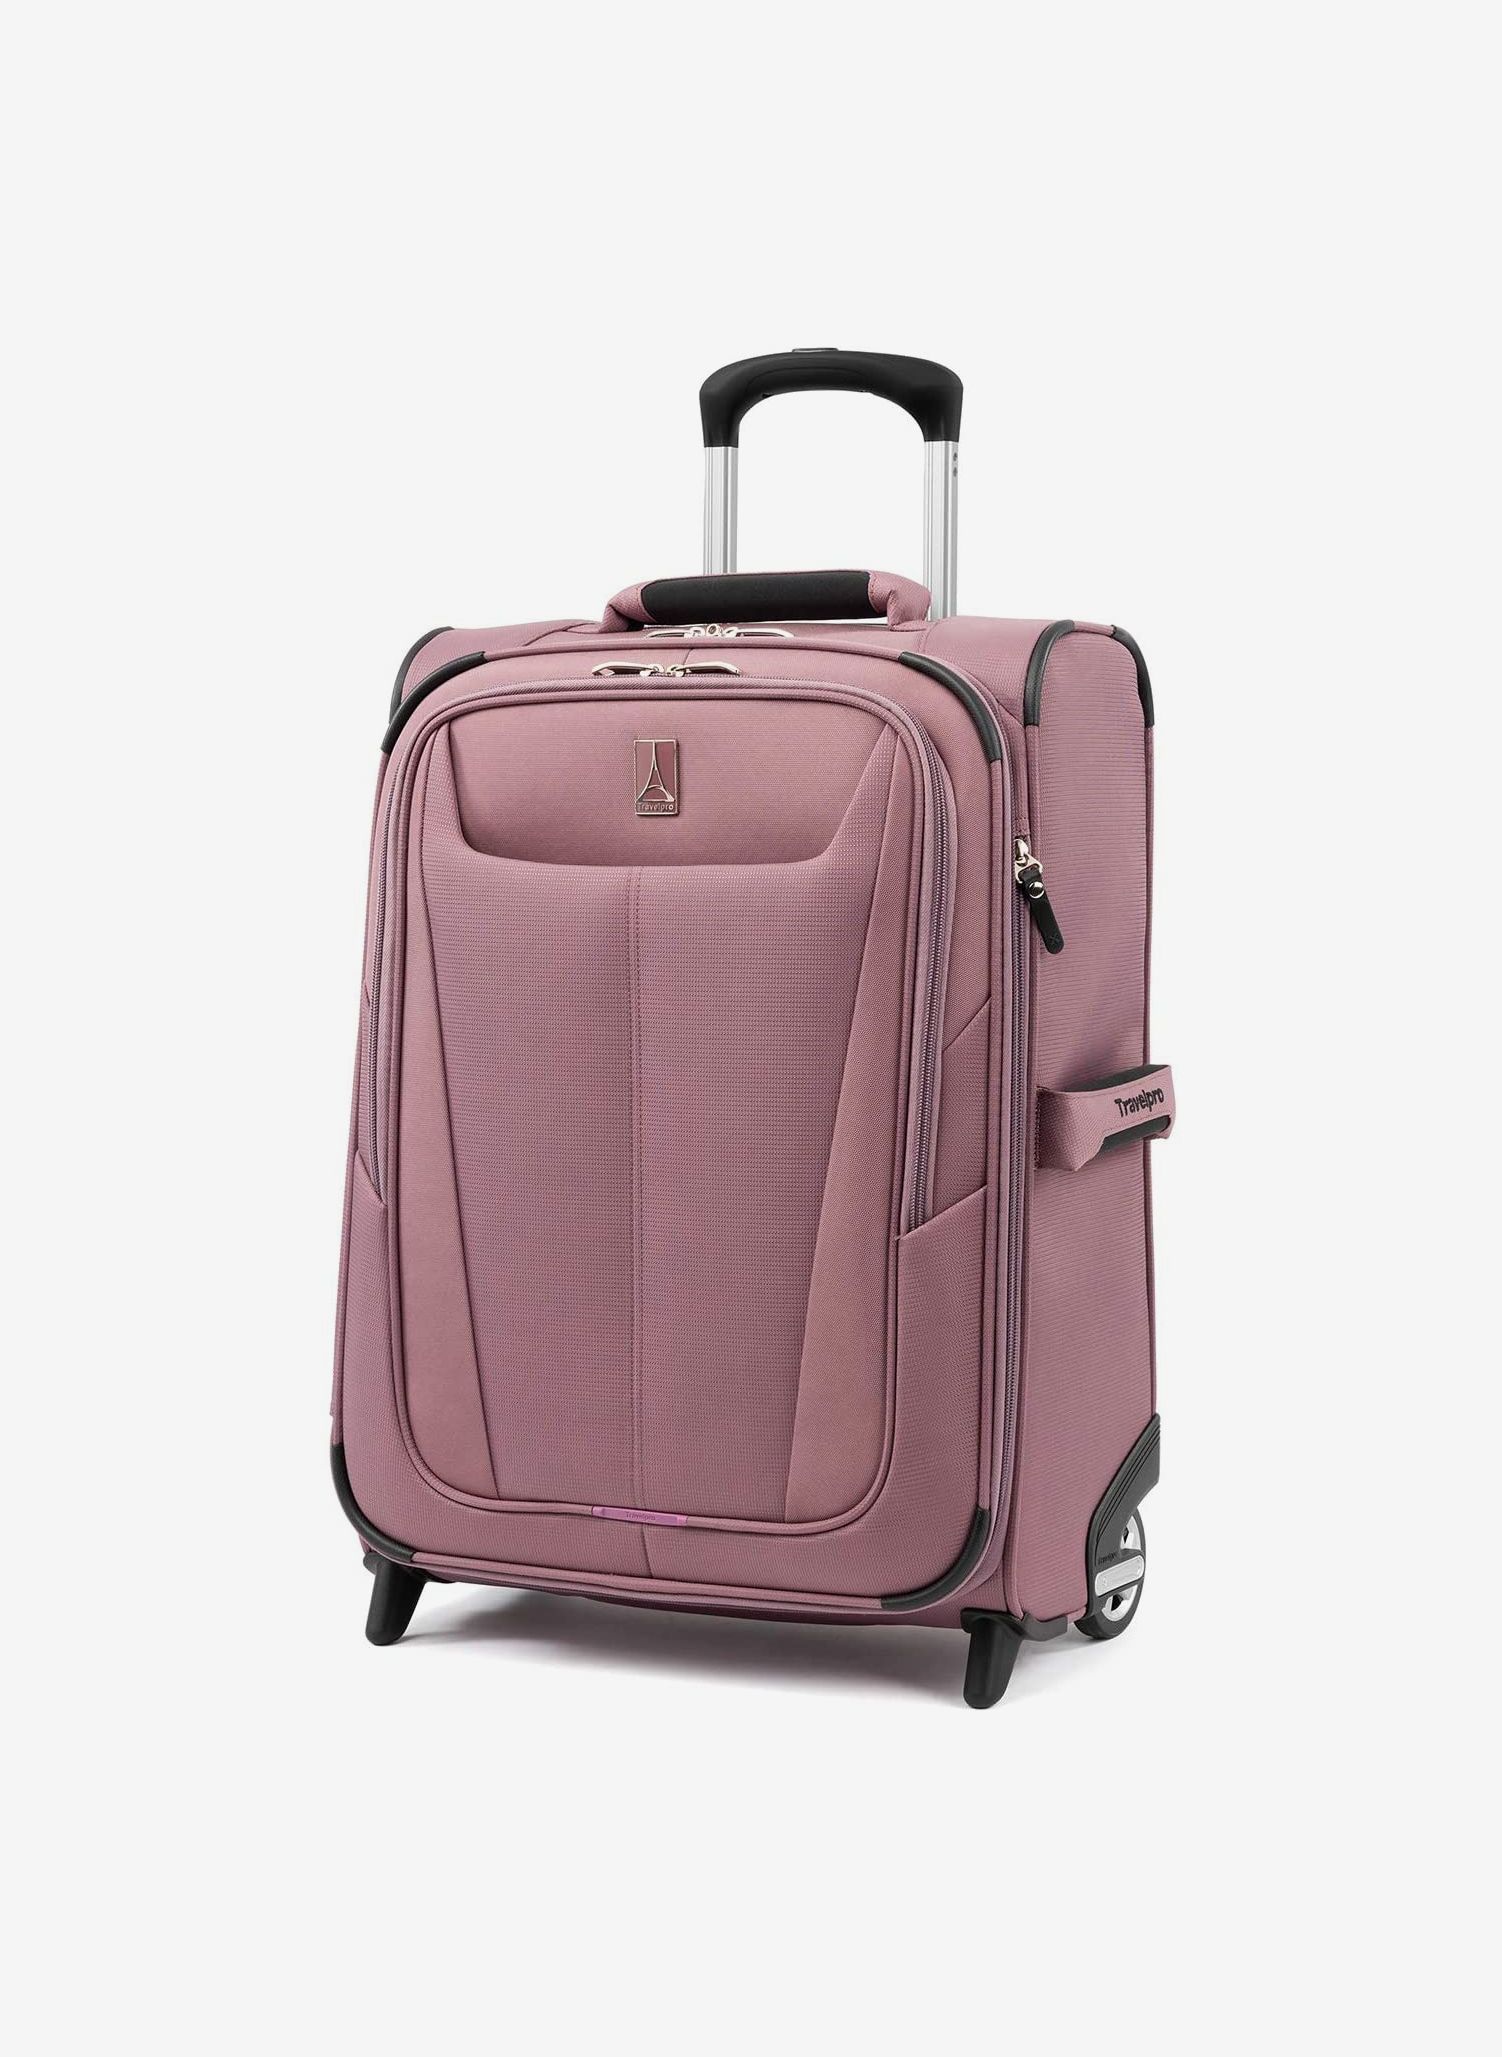 9 Best Rolling Luggage 2022 | The Strategist